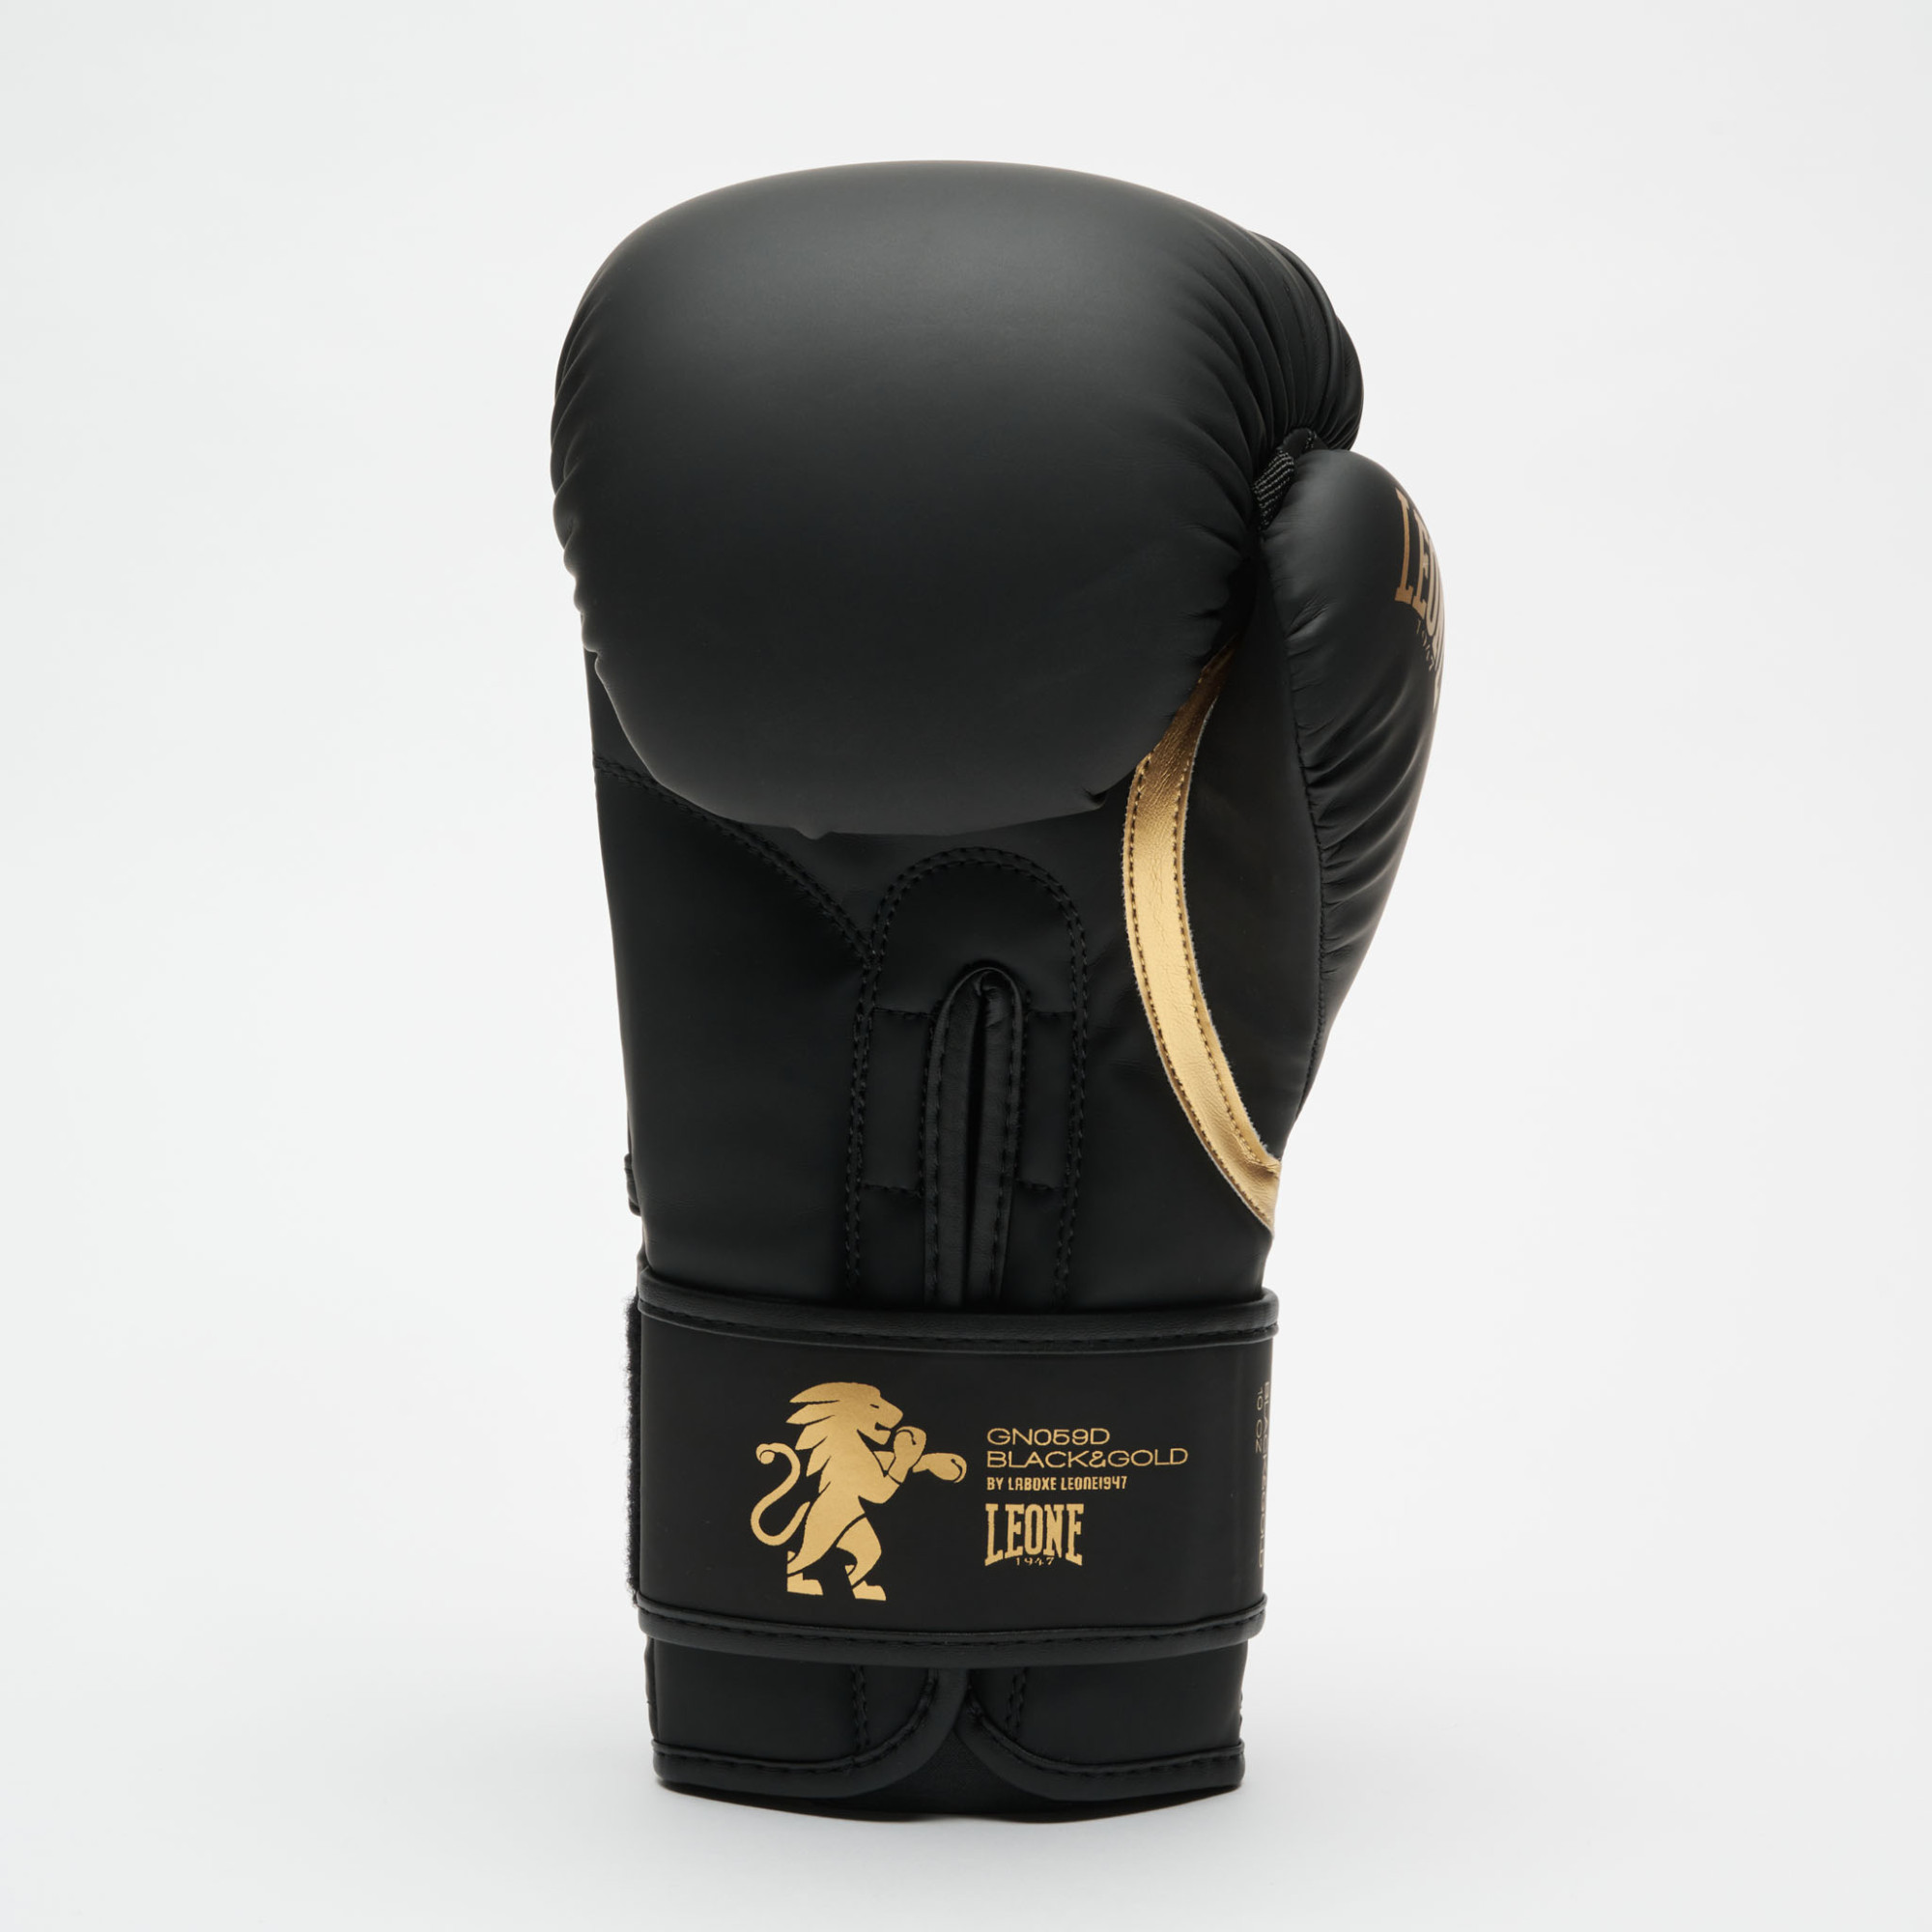  LEONE 1947 GN059 Boxing Gloves Unisex Adult, Black, 10 oz :  Sports & Outdoors